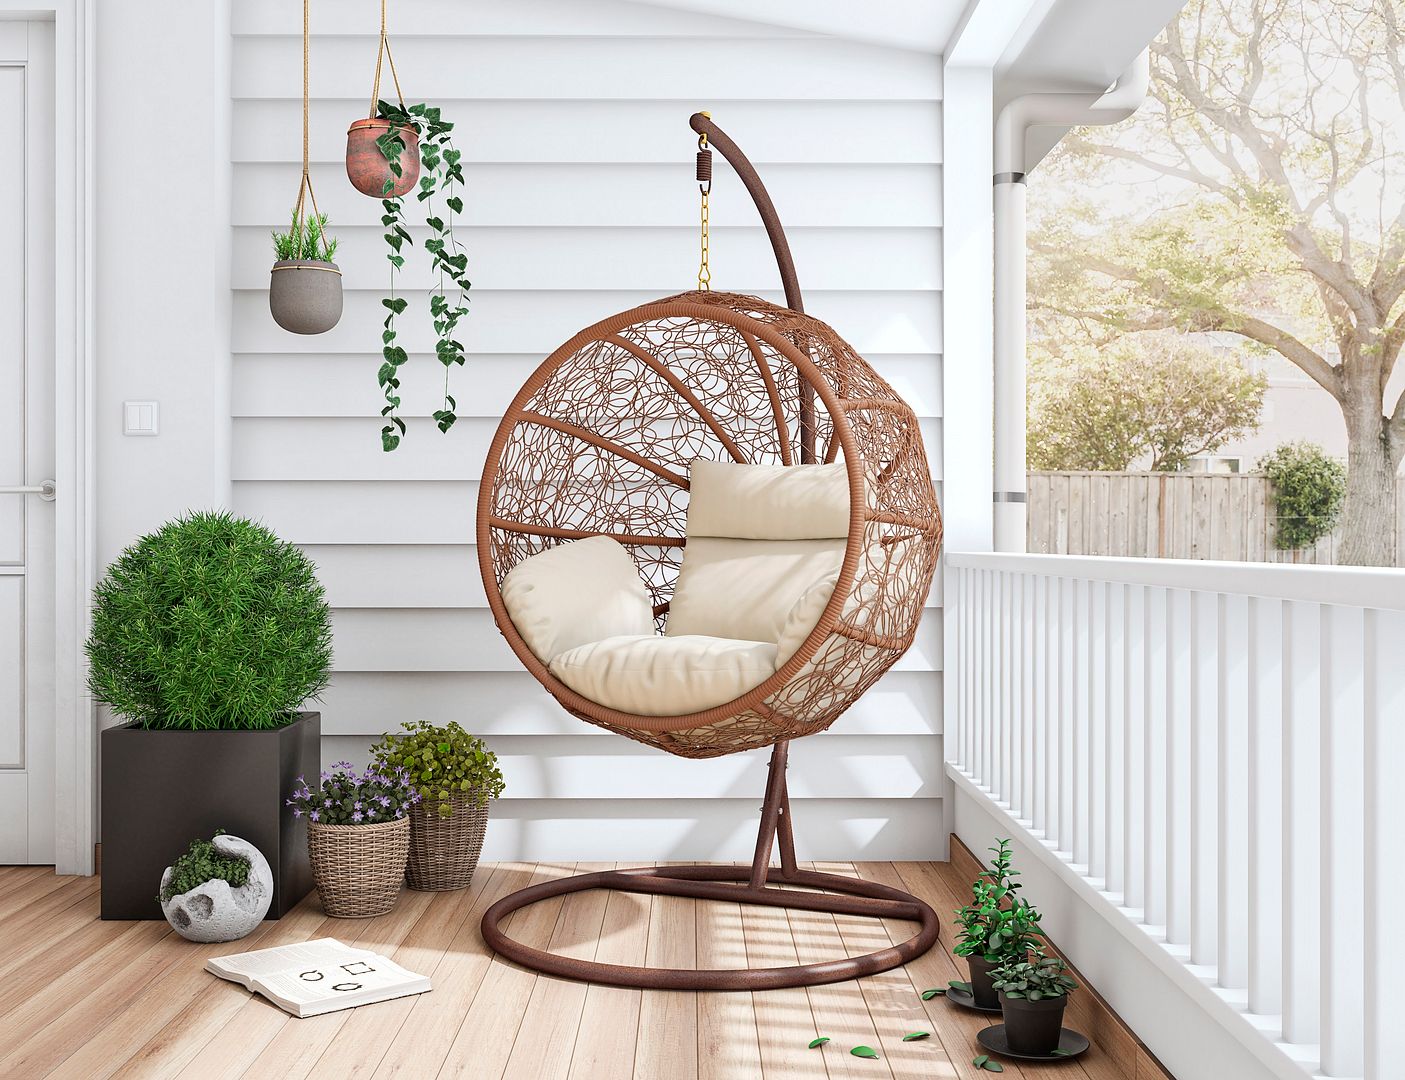 Zolo Hanging Lounge Egg Swing Chair in Cream and Saddle Brown